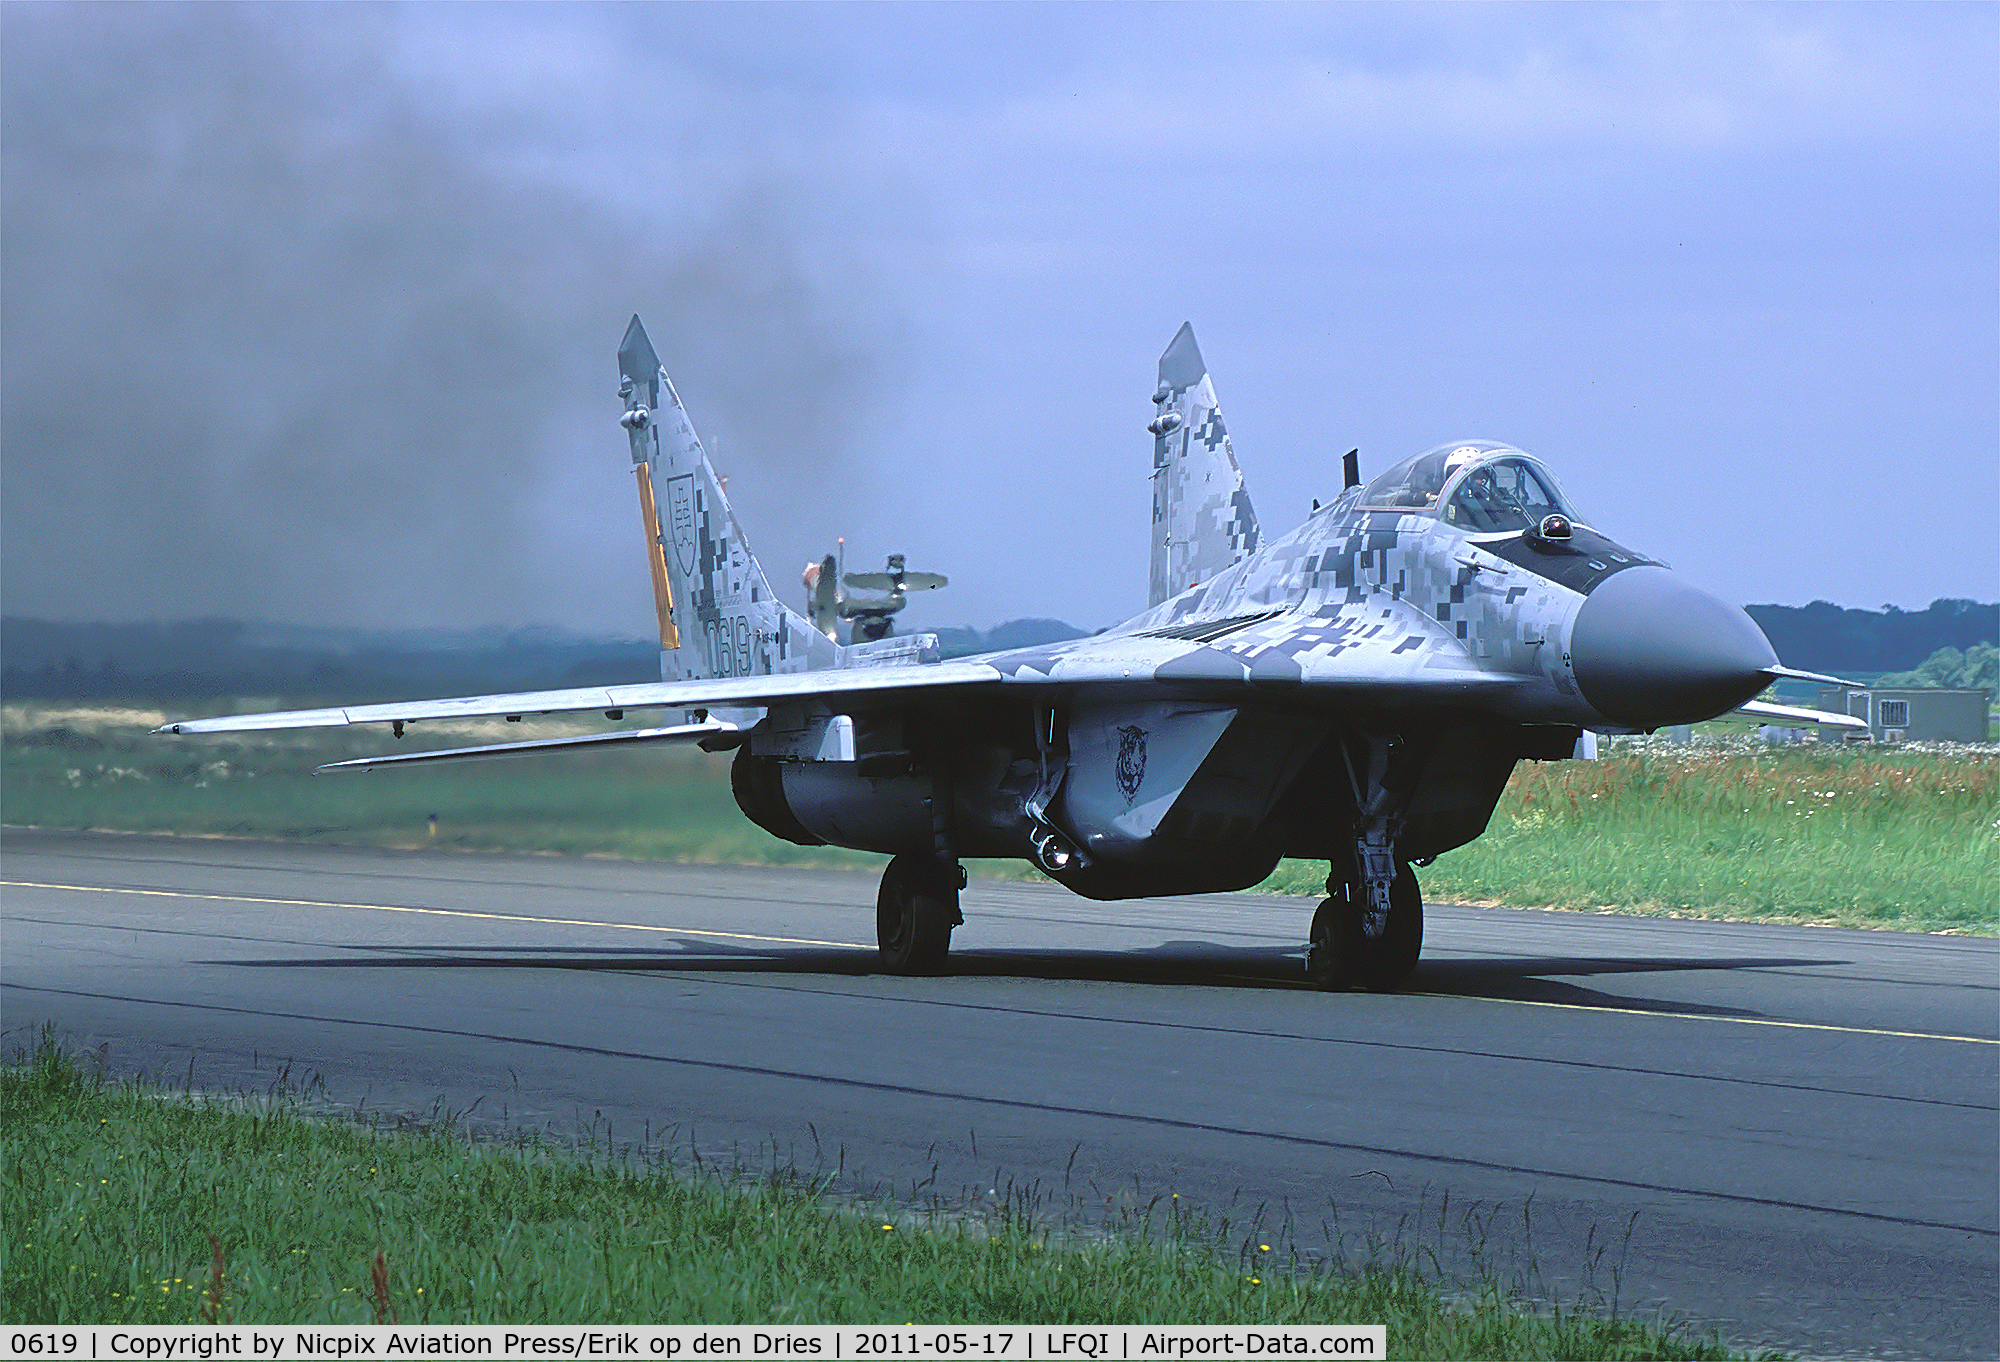 0619, Mikoyan-Gurevich MiG-29AS C/N 2960535406/4713, Slowak ia AF MiG-29AS Fulkcrum showing its' digital camouflage scheme, taxies out during the NTM-2011./